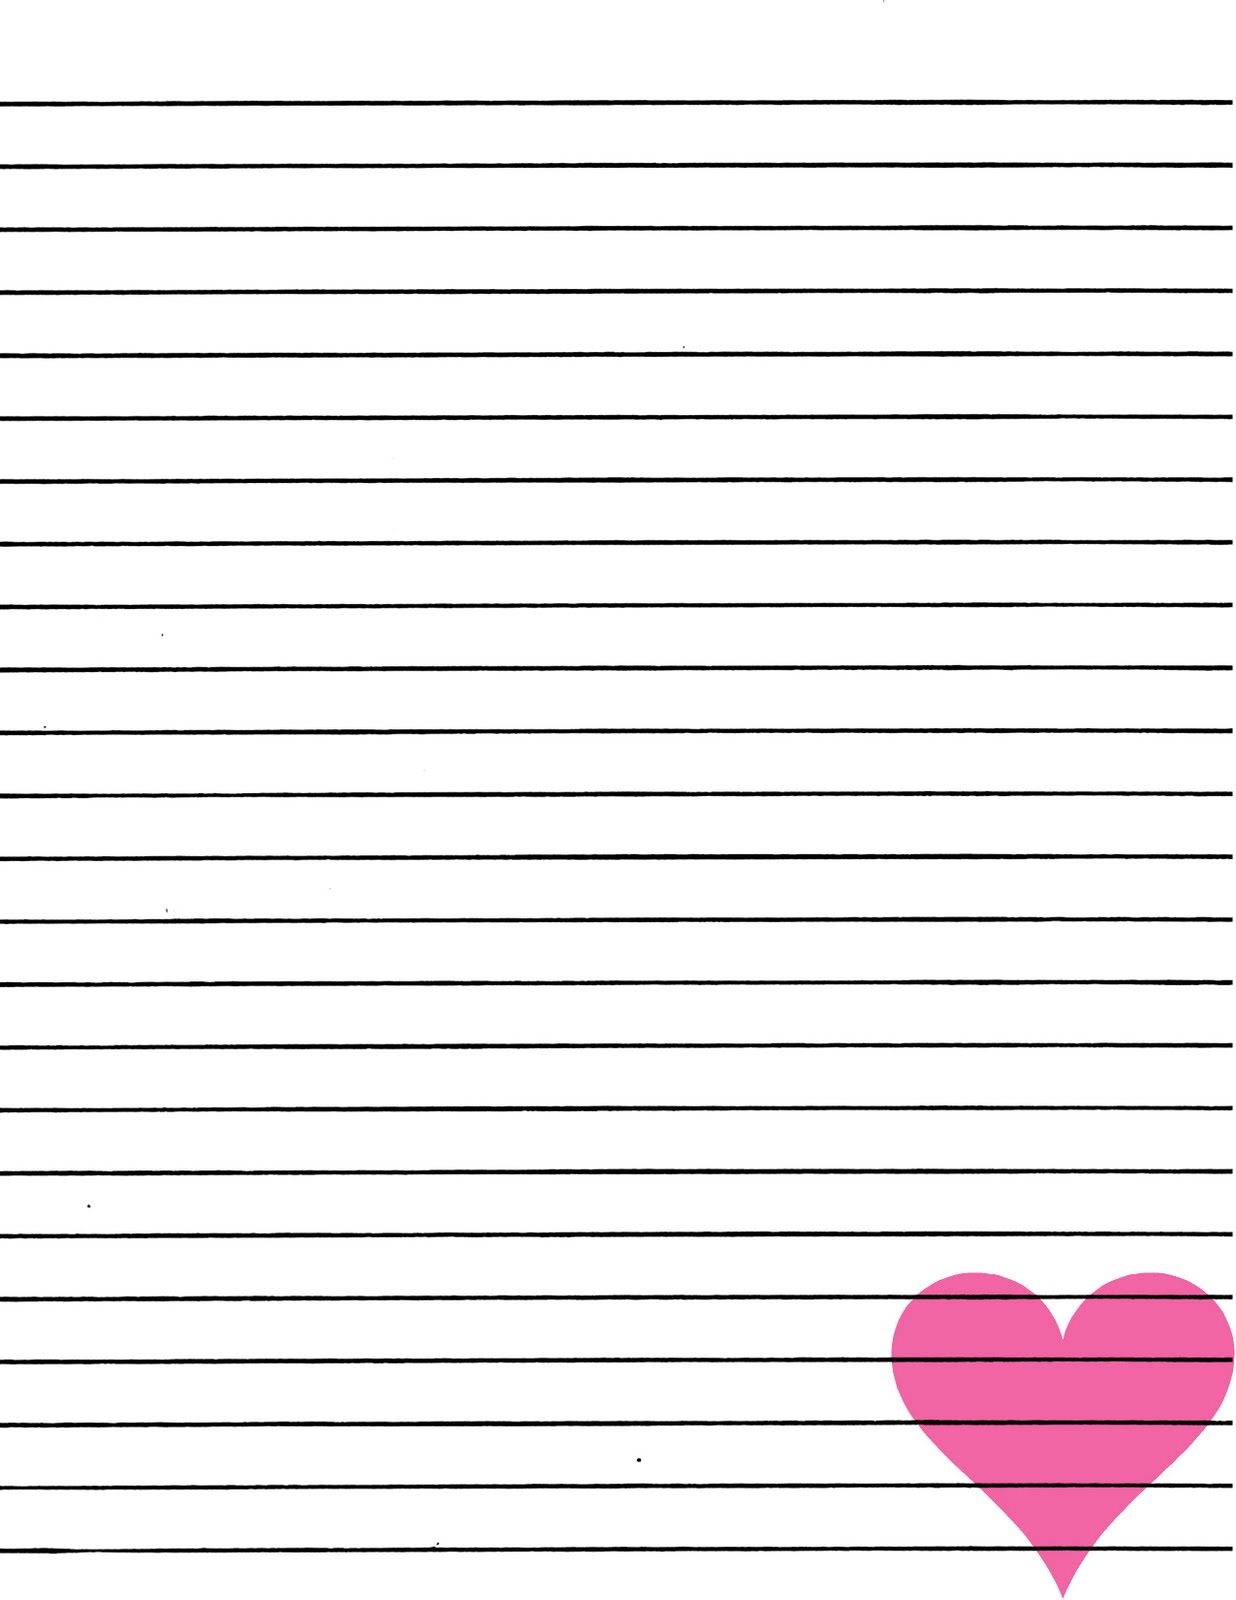 printable-lined-paper-template-top-form-templates-narrow-ruled-lined-paper-on-a4-sized-paper